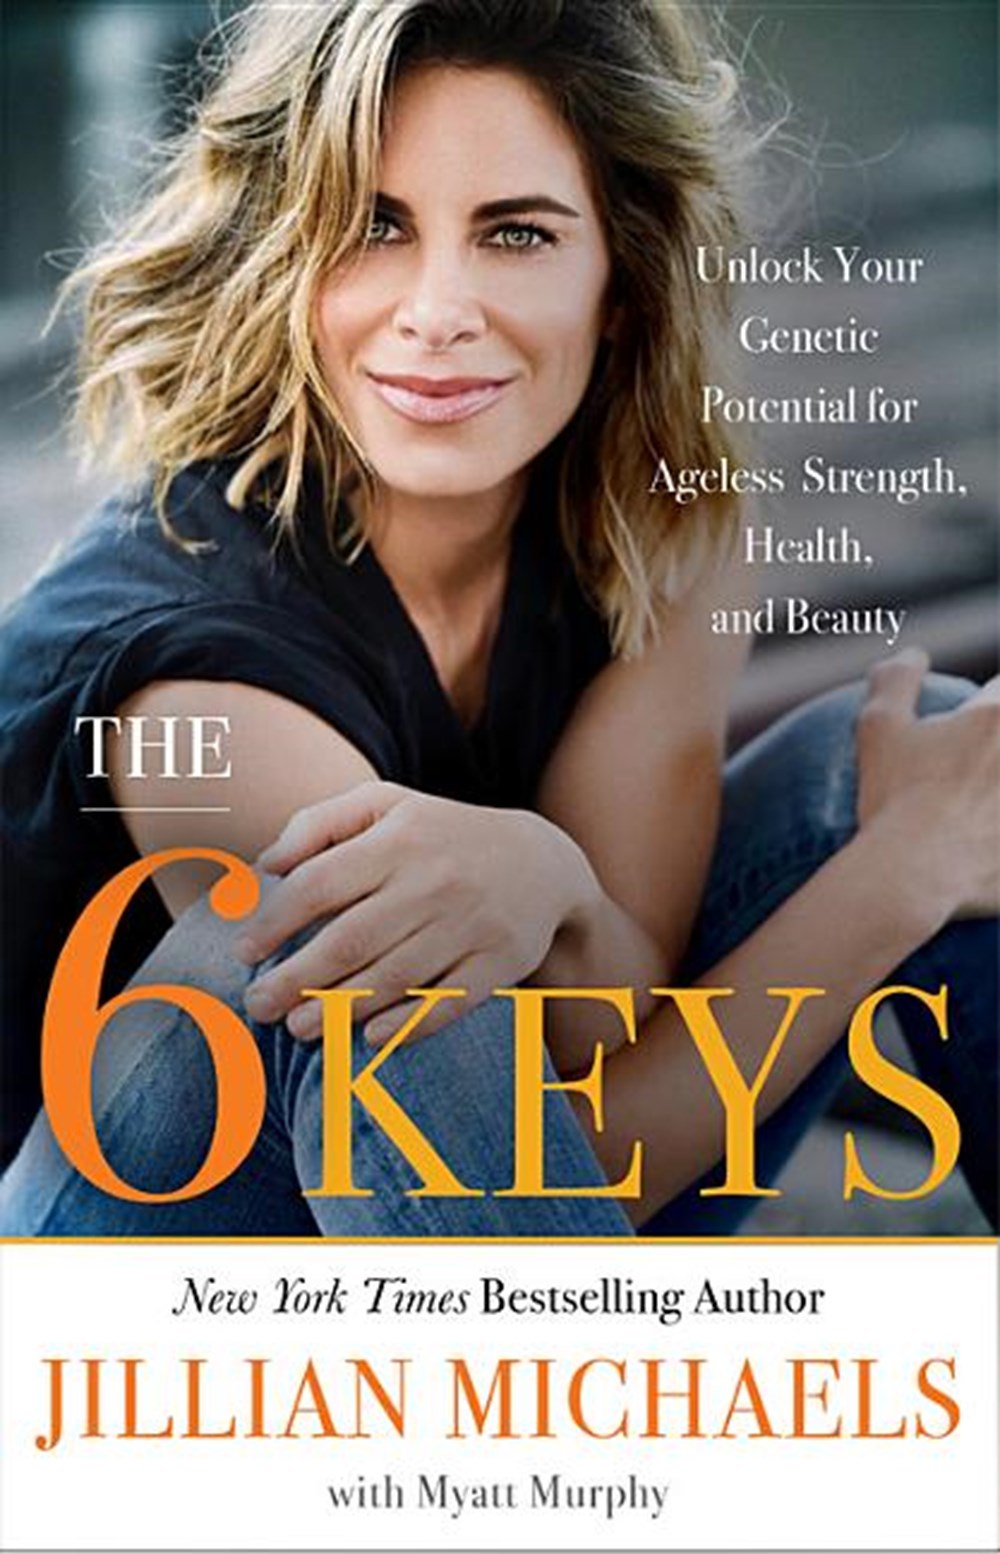 6 Keys: Unlock Your Genetic Potential for Ageless Strength, Health, and Beauty